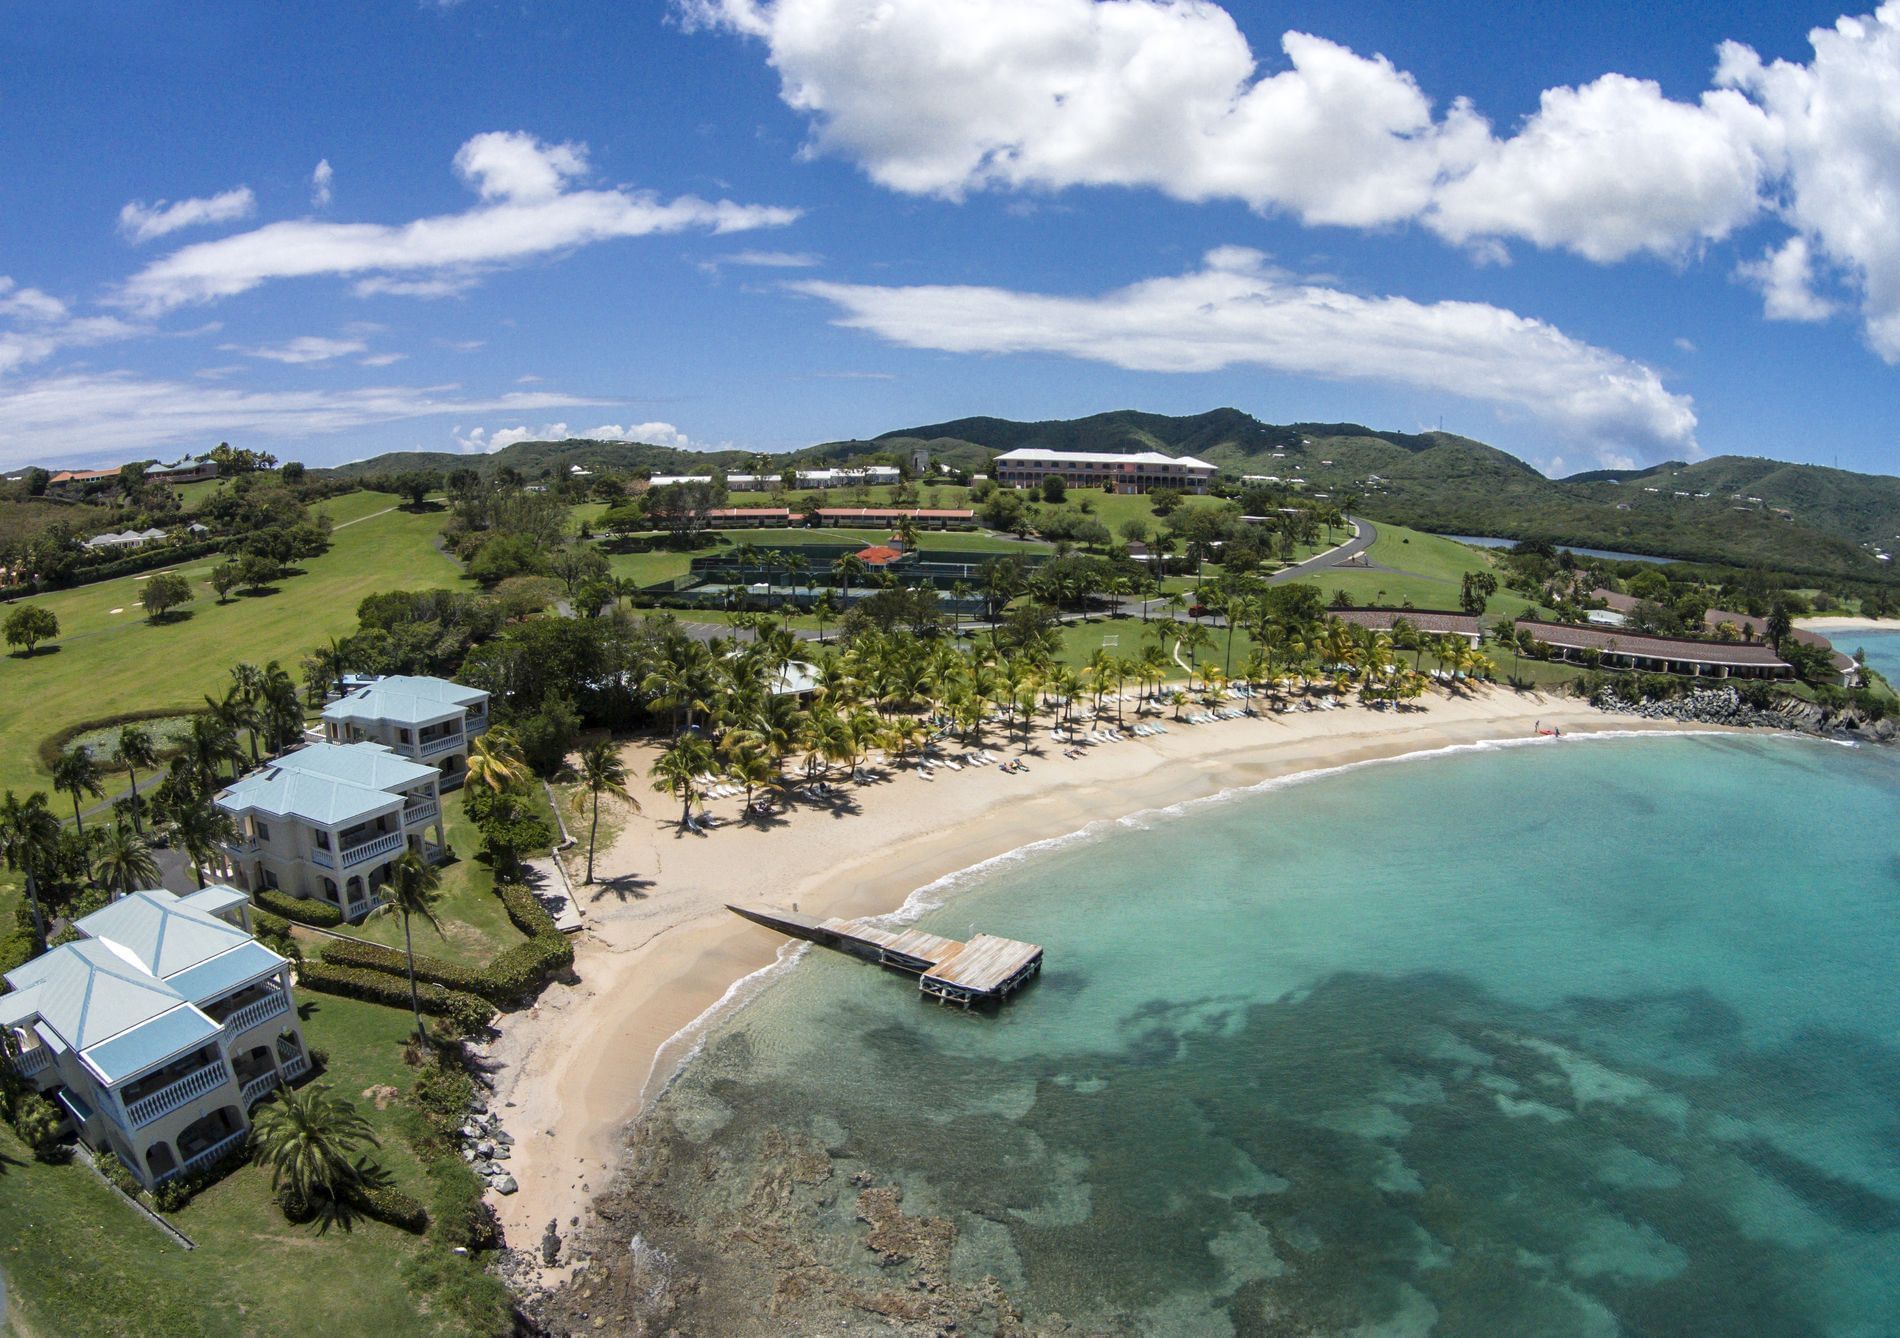 Aerial view of the Hotel & ocean at The Buccaneer Resort St. Croix